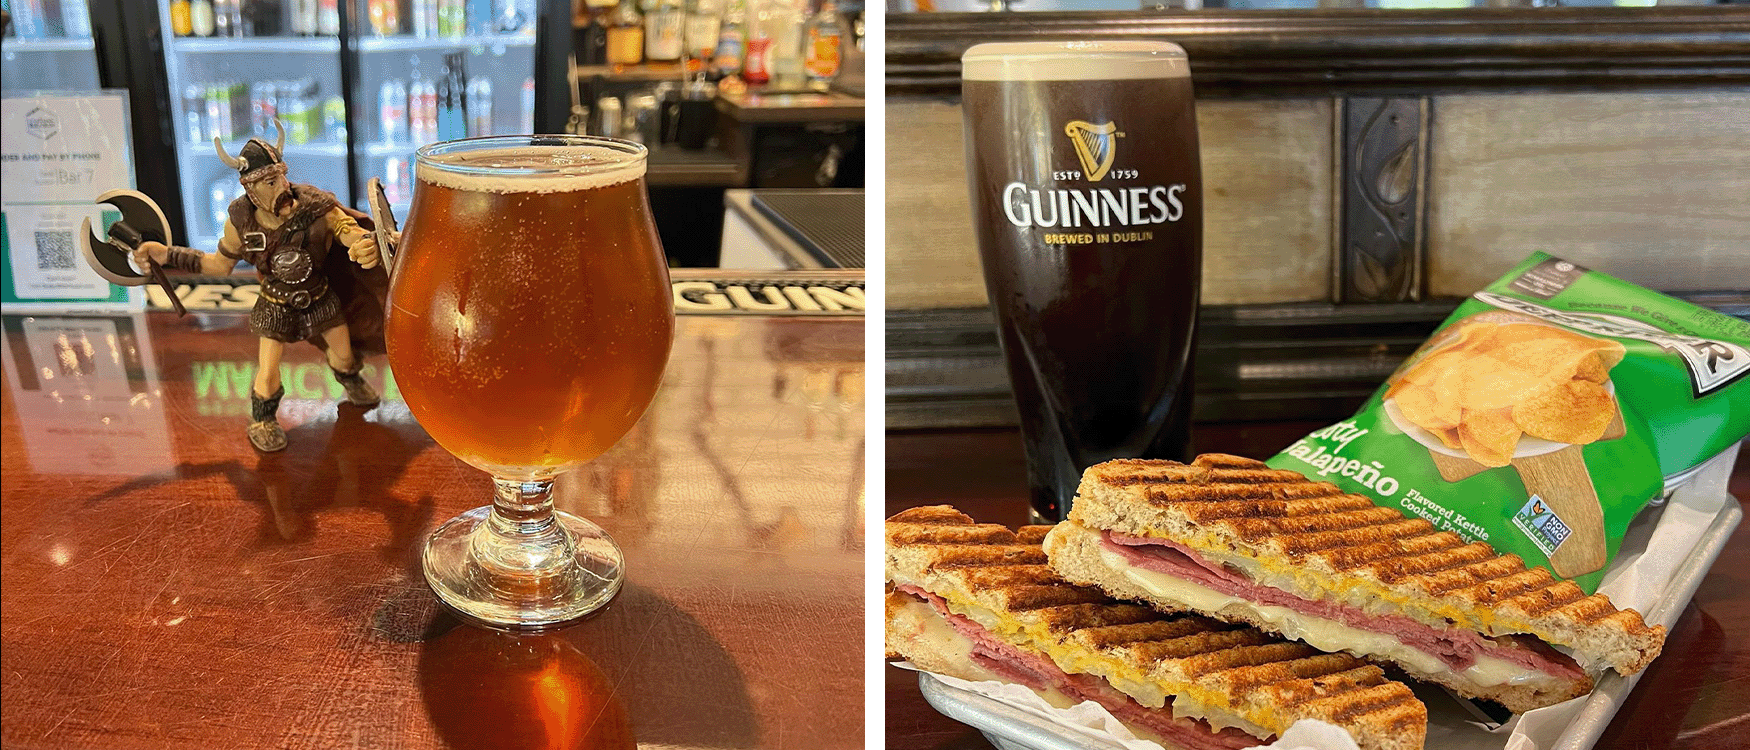 Glass of beer (left) and grilled sandwich (right)